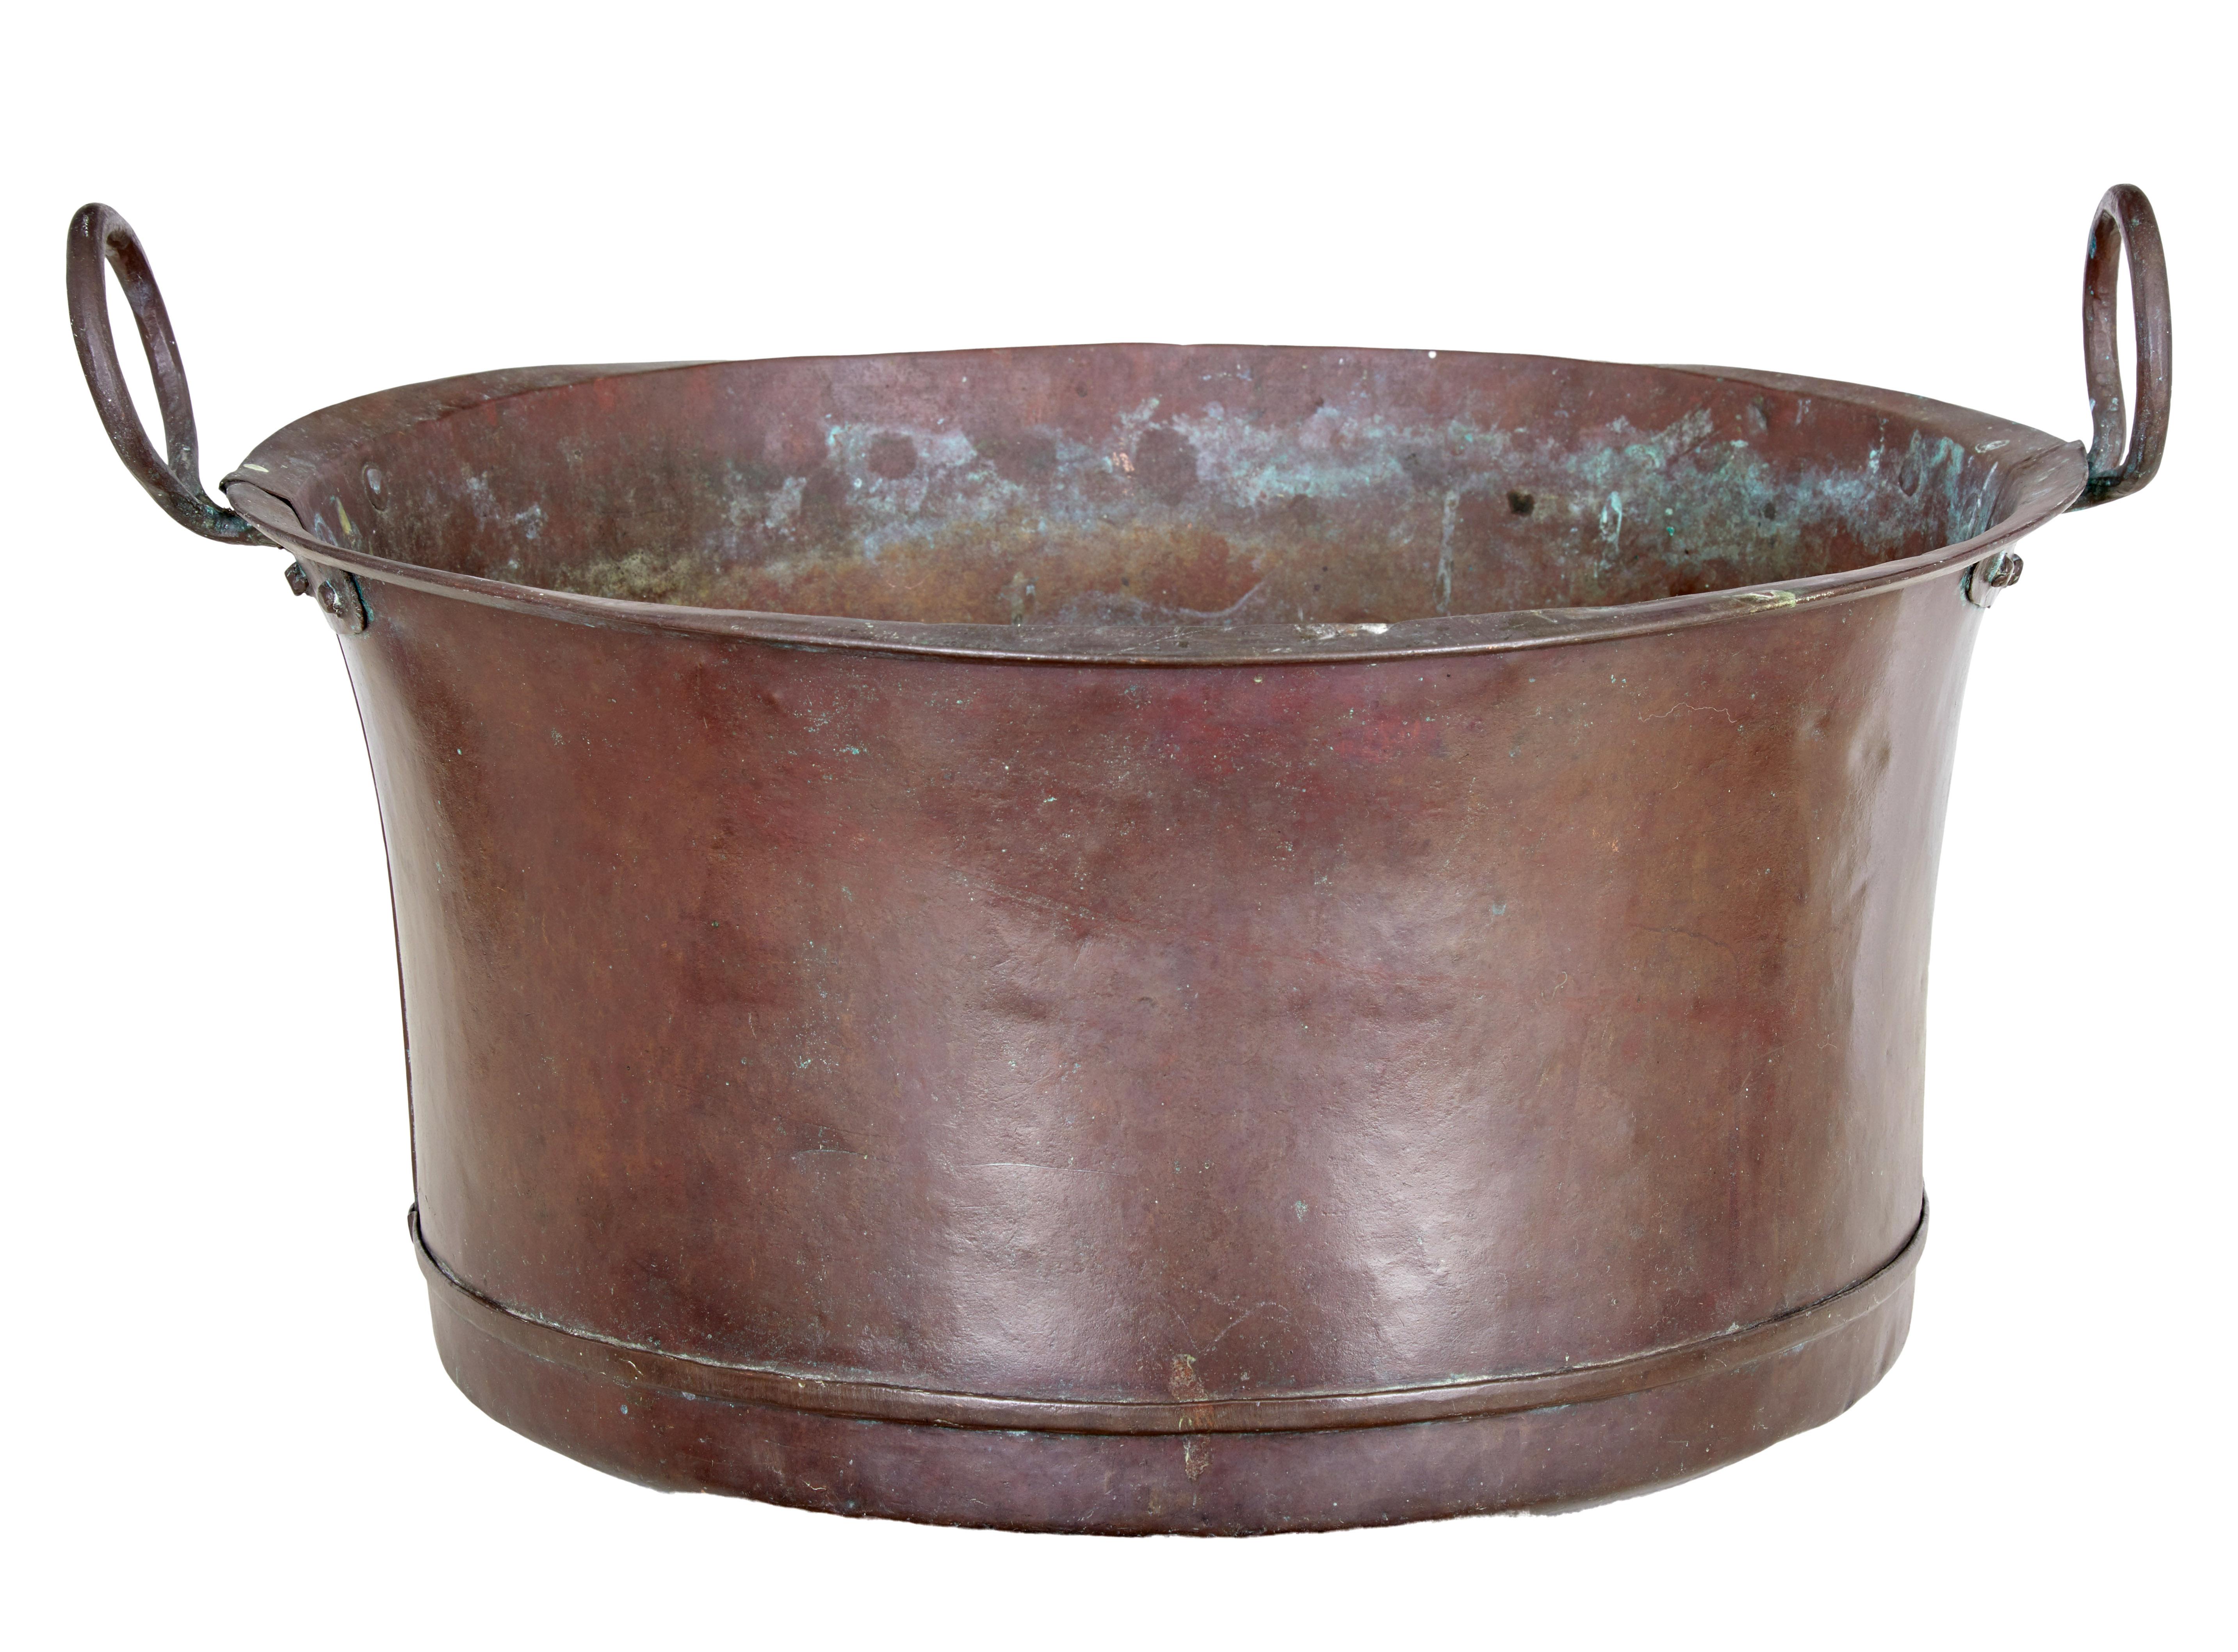 Large Victorian 19th century copper cooking vessel, circa 1890.

Rustic rounded bottom cooking vessel, which would now make an ideal log or waste paper bin.

Round in shaped with large hooped handles.

Expected surface marks and minor dents.